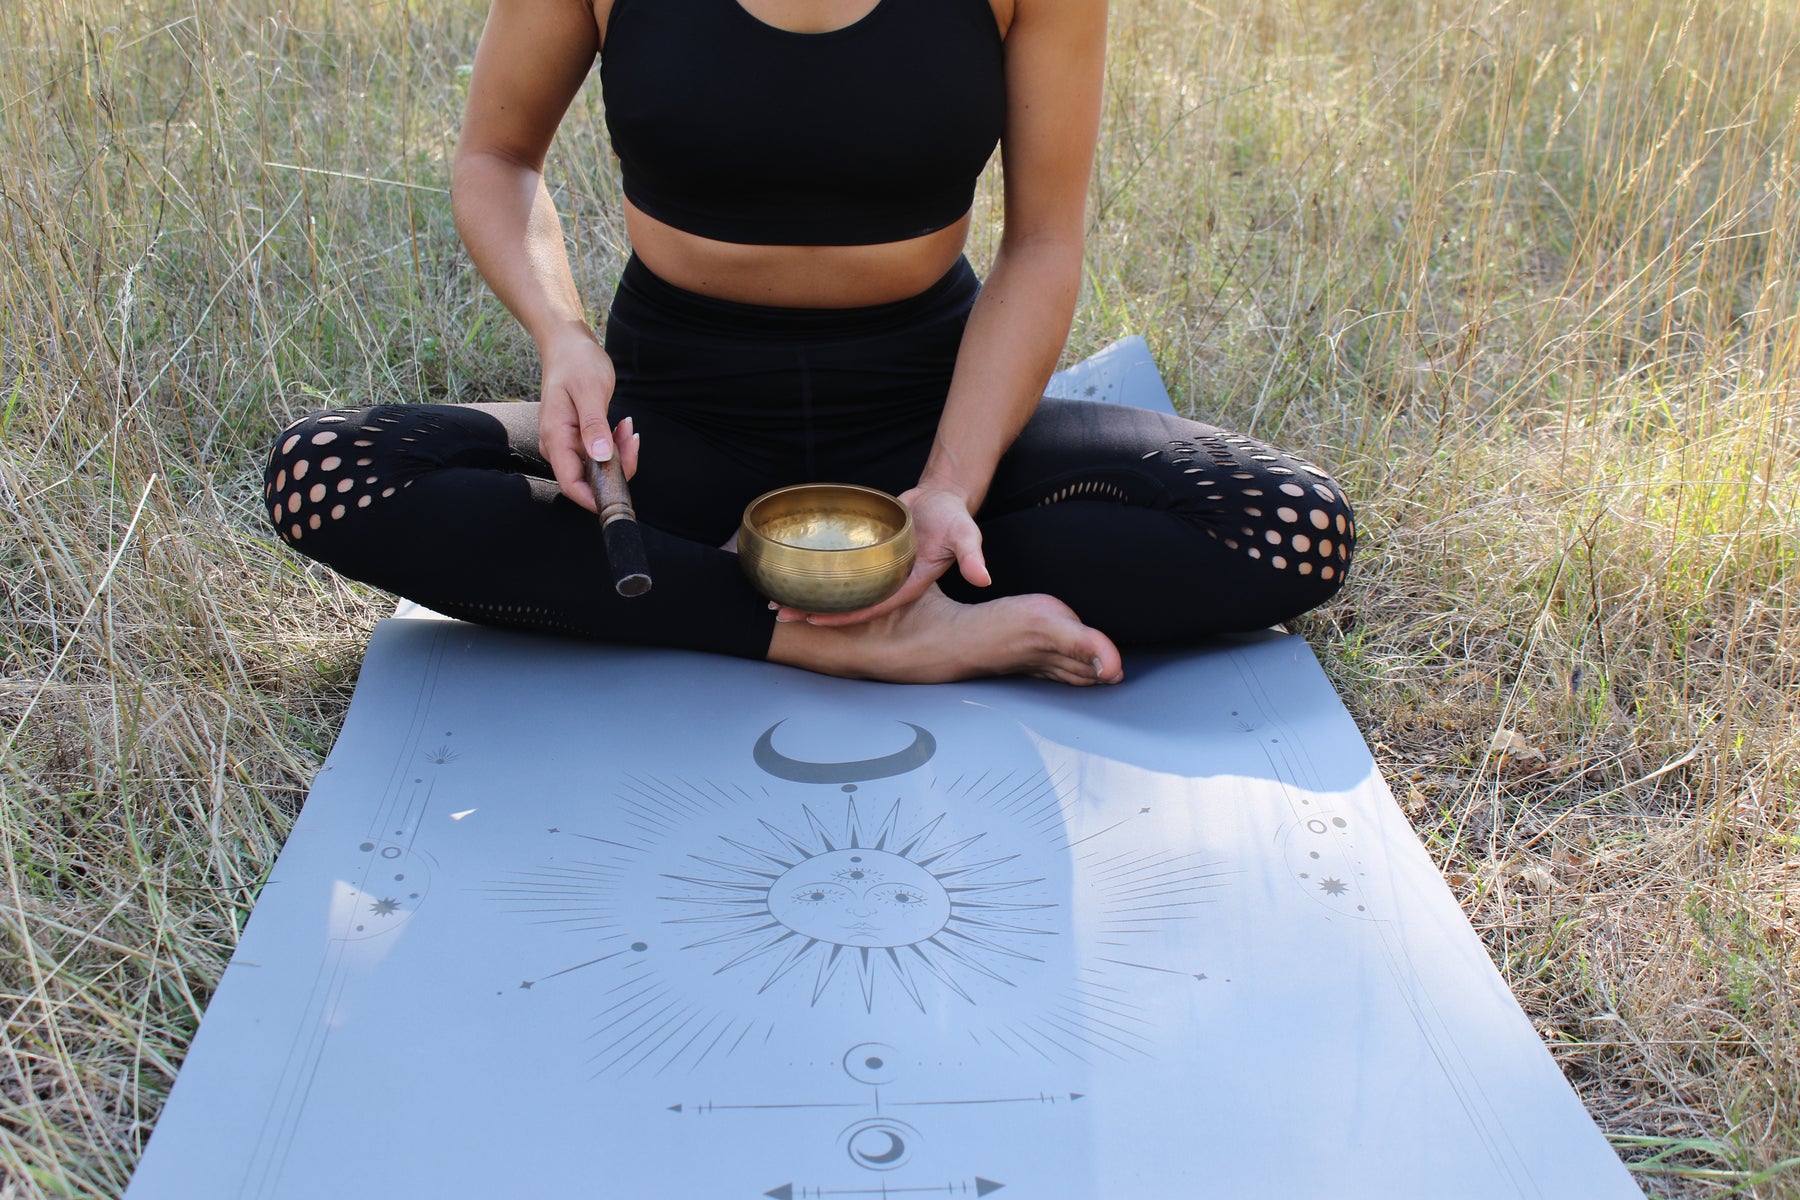 Non-slip and environmentally friendly yoga mats. Your yoga shop for sustainable yoga mats & yoga accessories. Discover your new PU yoga mat, microfiber yoga mat or cork yoga mat. Natural rubber base.